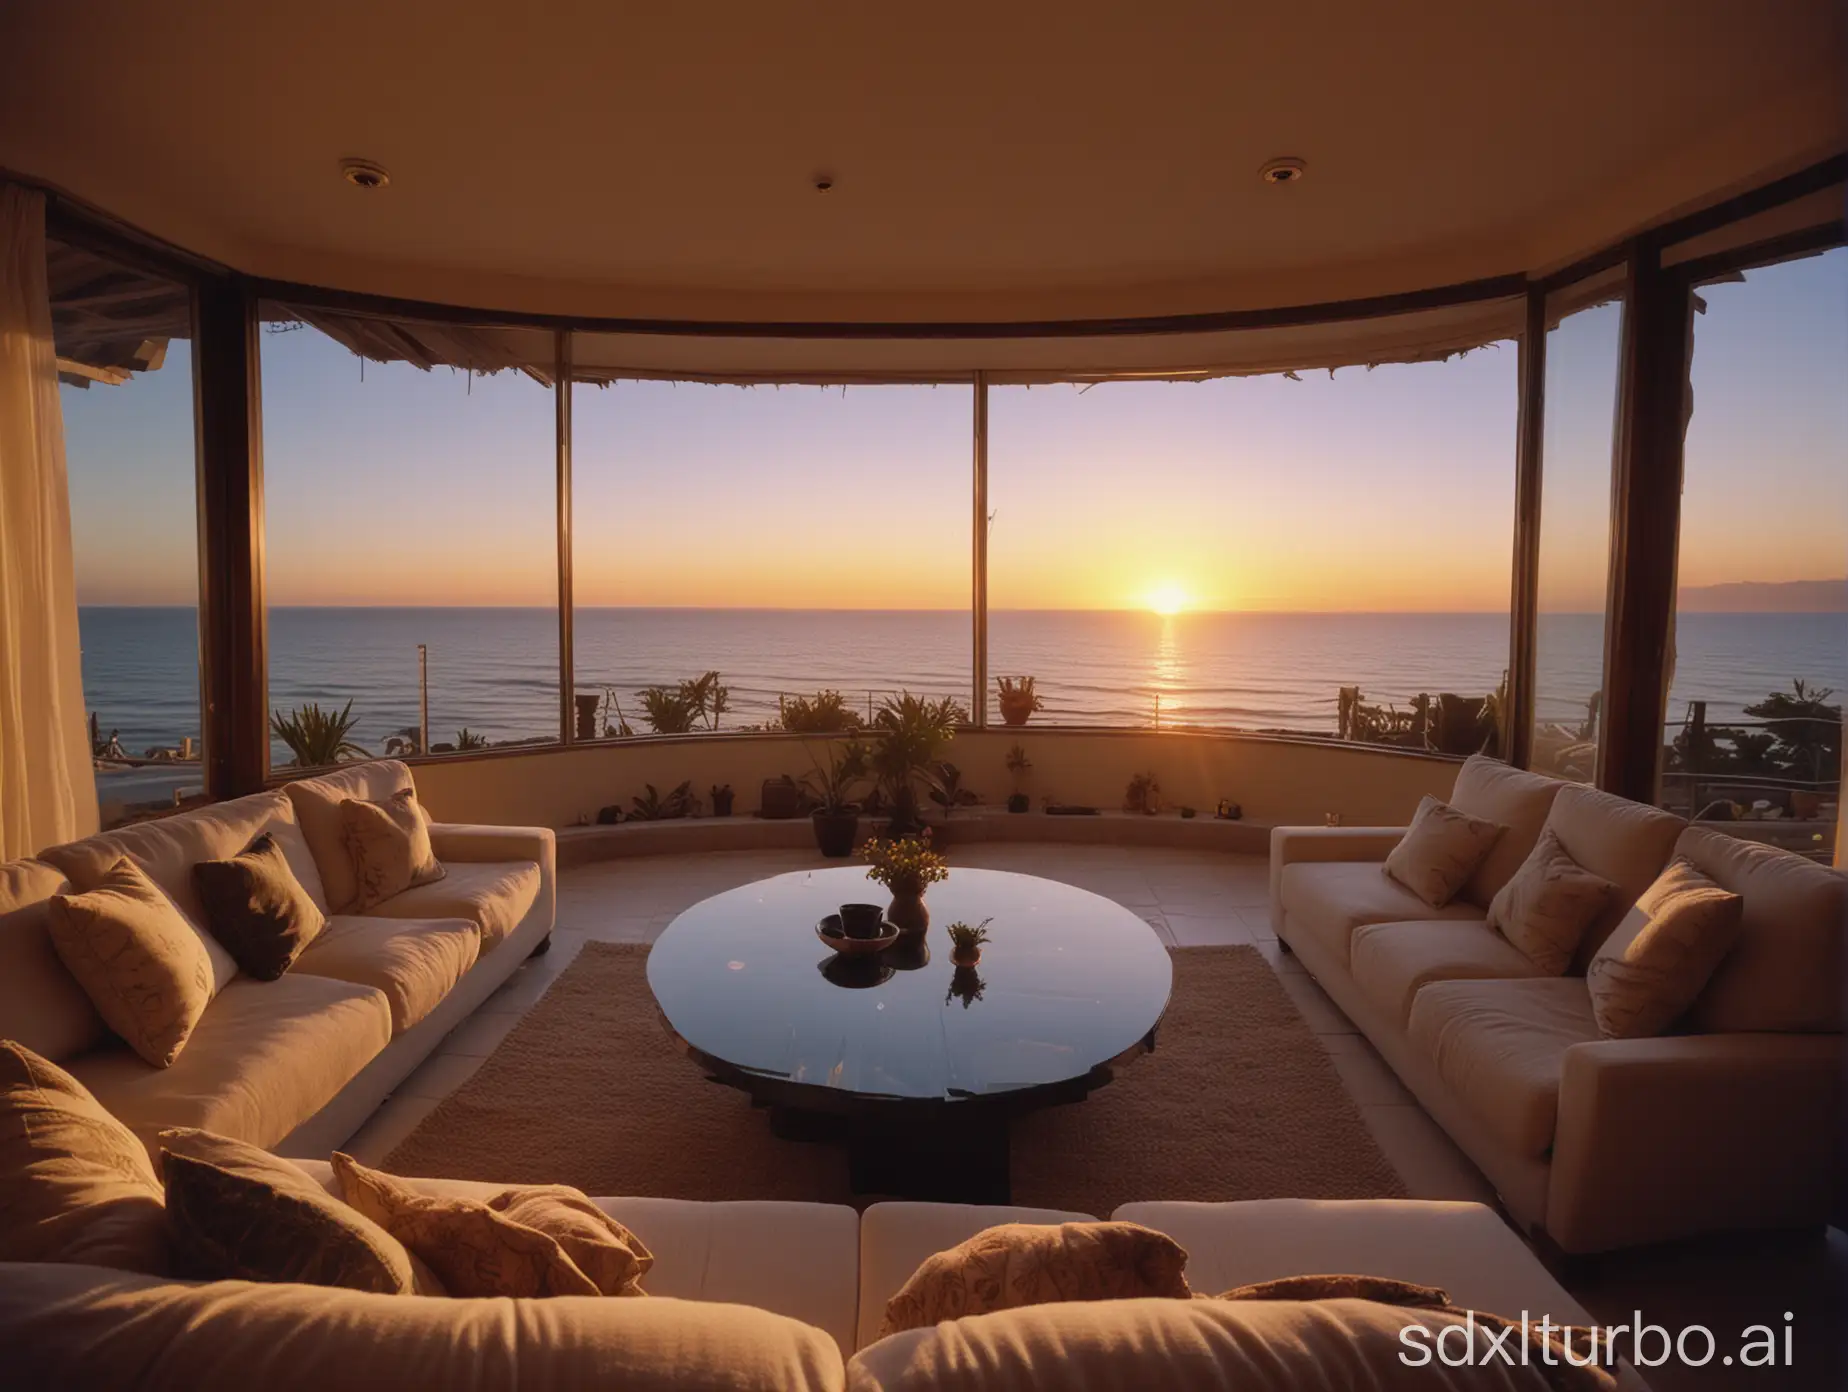 The image shows a cozy living room with a panoramic view of the ocean and a sunset.fuji provia，Wide Angle